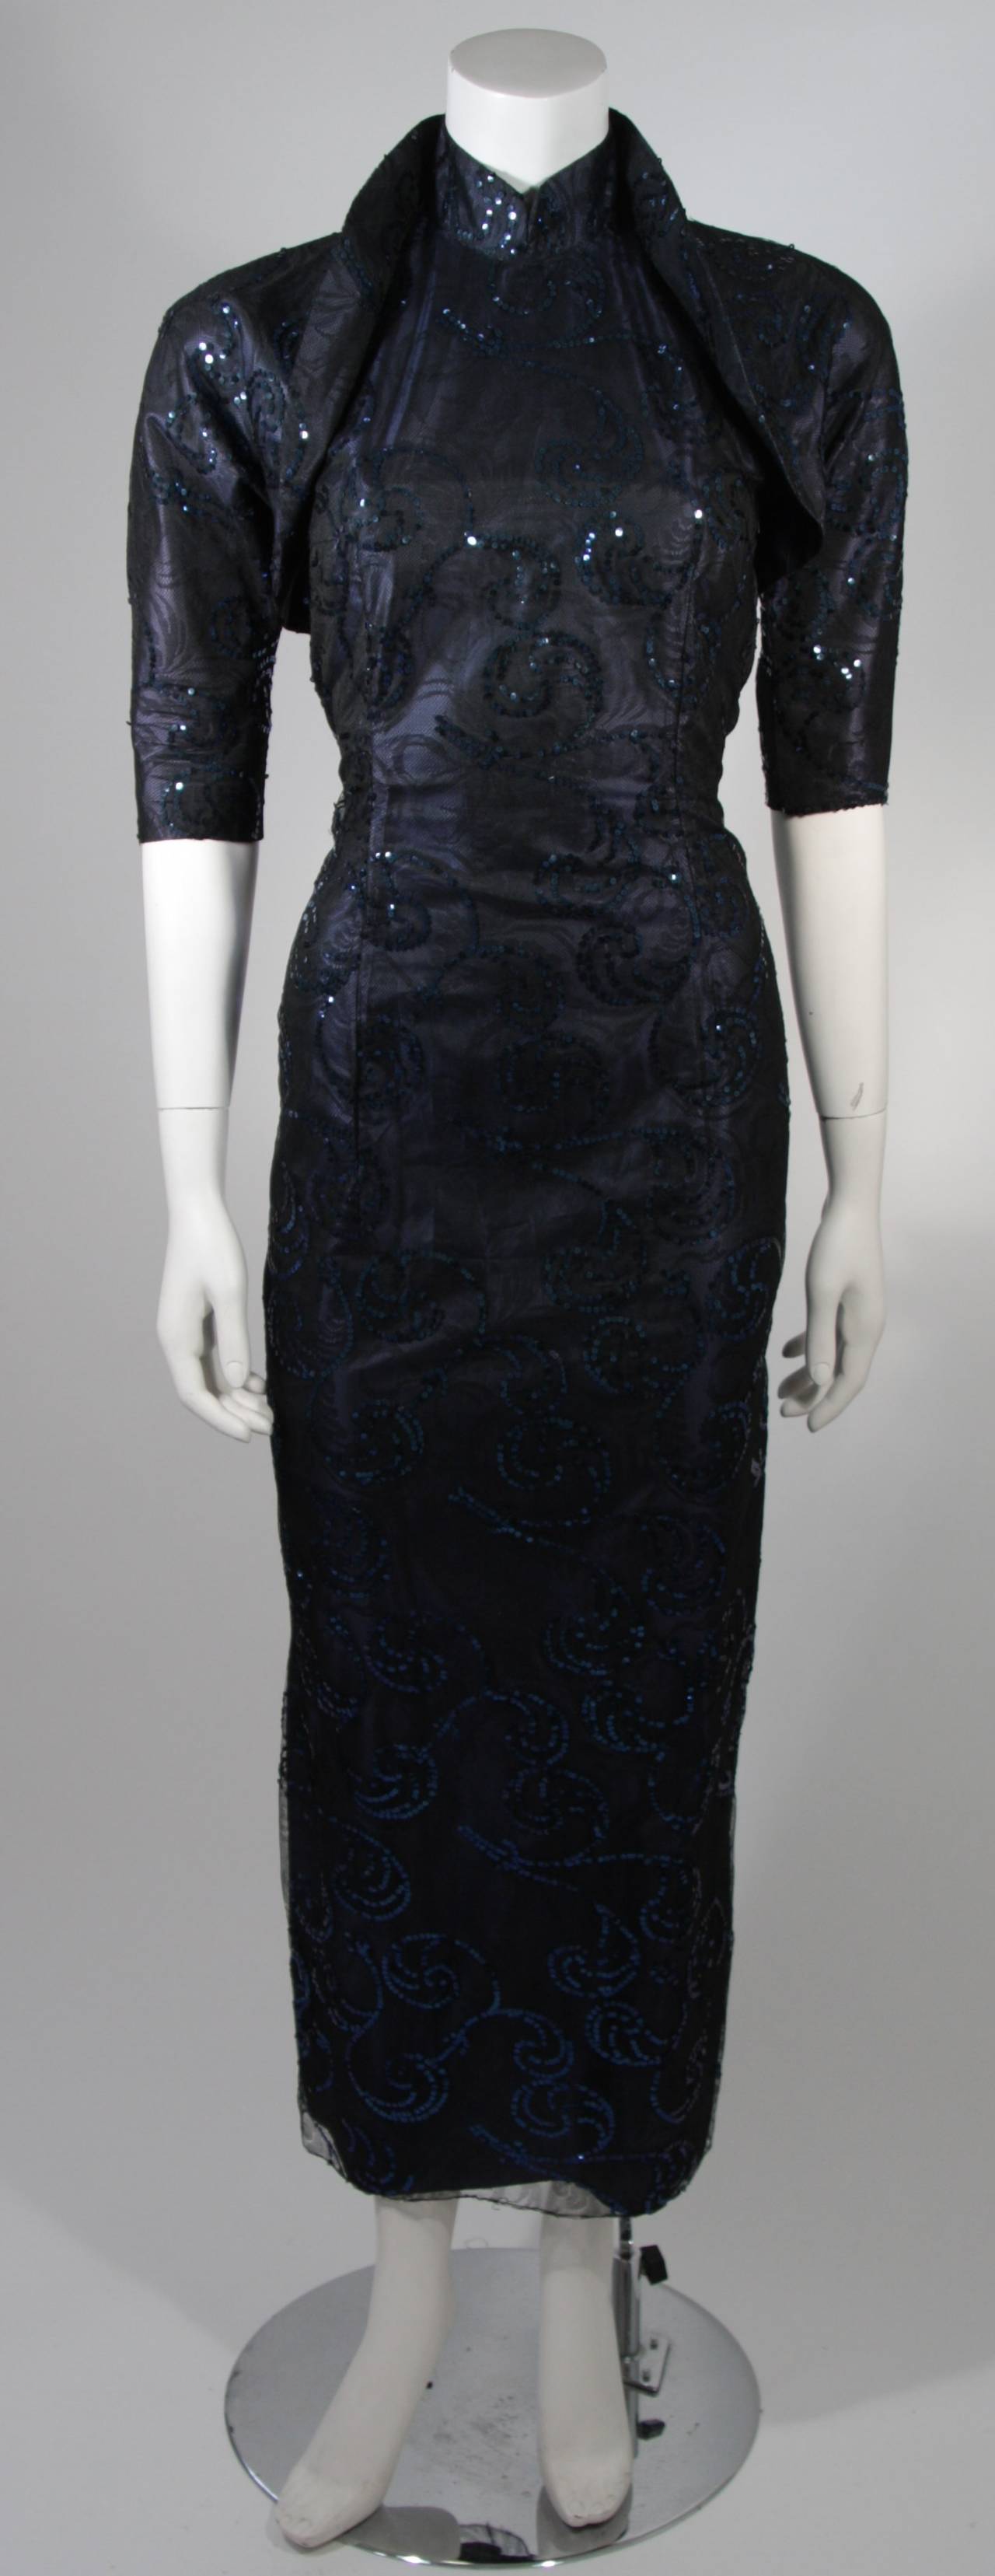 This Asian inspired set is composed of deep sapphire silk with a black net overlay and hand applied sequins. The bolero has a snap option attach to the gown. The gown features a mandarin neckline and zipper closure. The set is in good